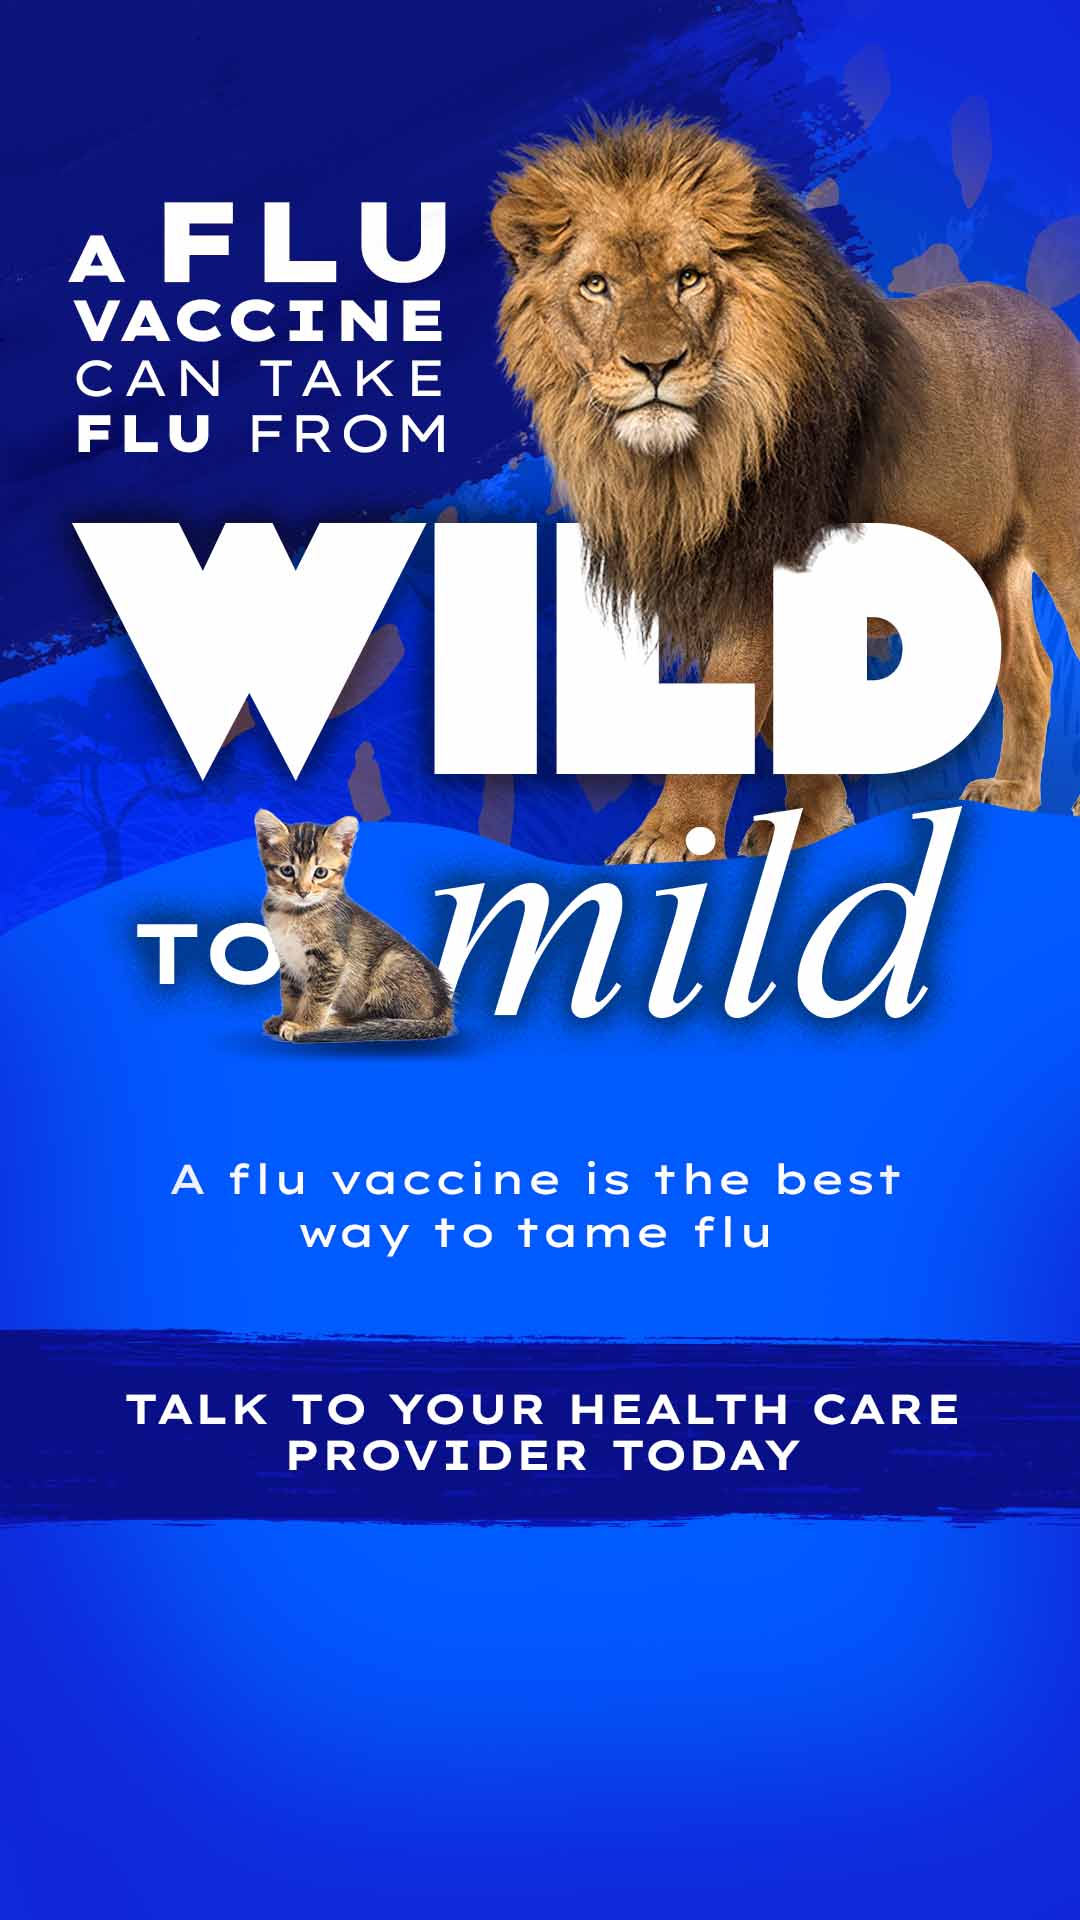 A flu vaccine can take flu from wild to mild A flu vaccine is the best way to tame flu Talk to your health care provider today